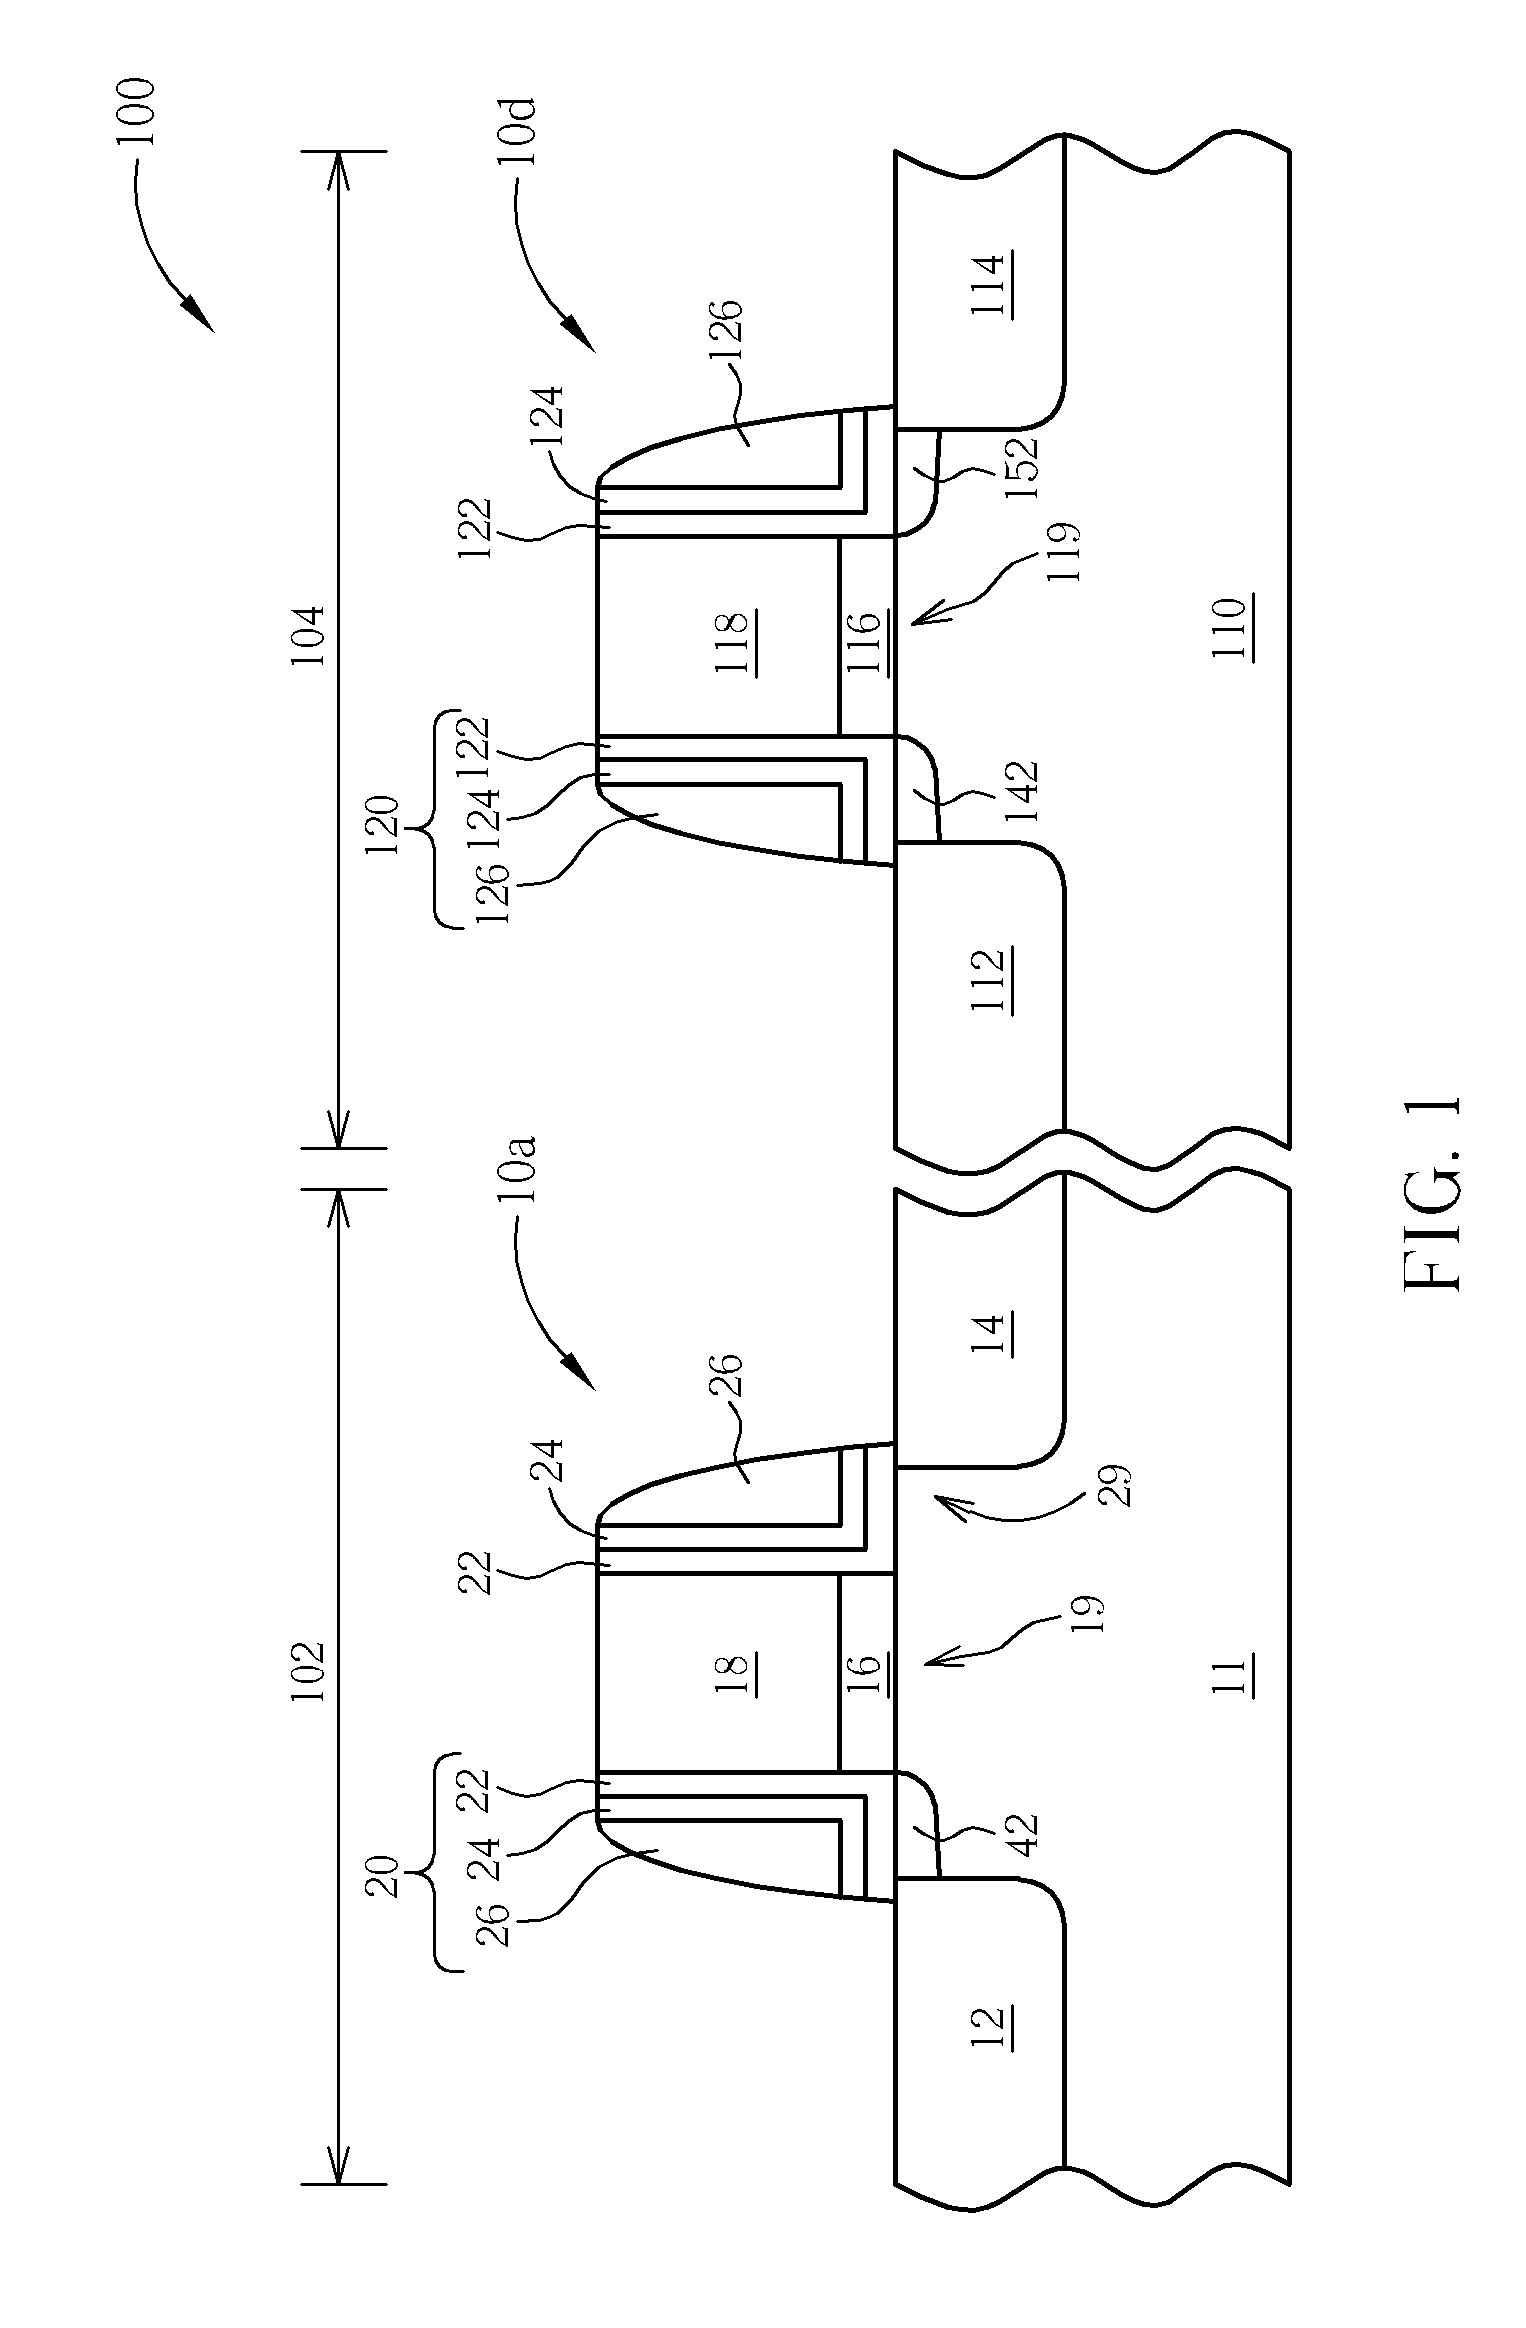 Method for operating single-poly non-volatile memory device